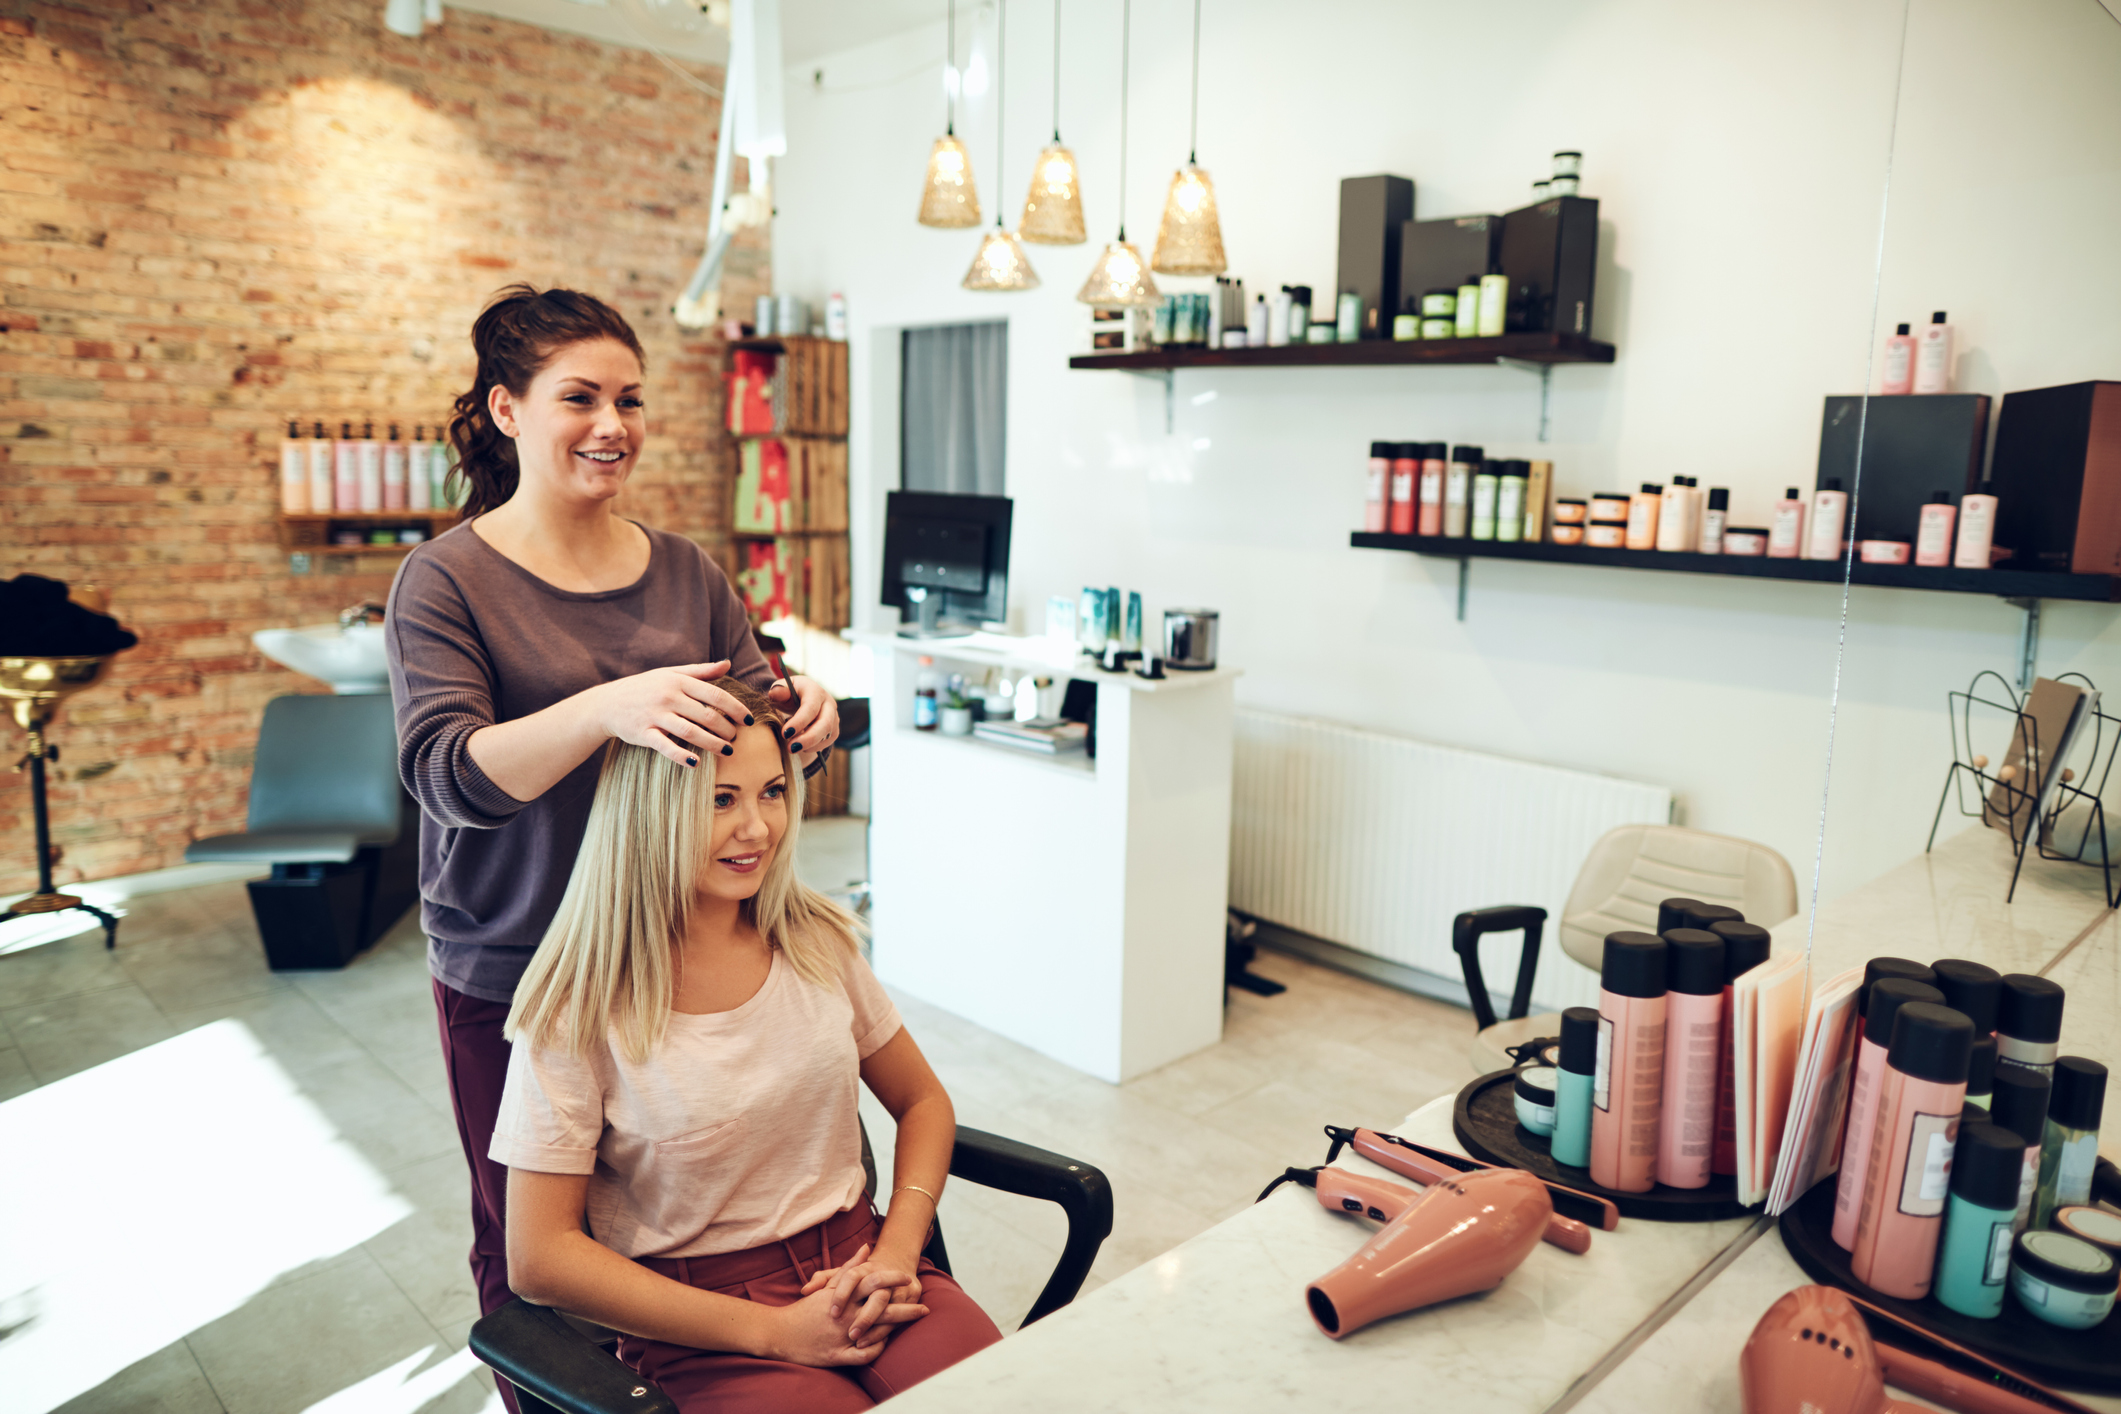 How to Get a Great Job as a Fashion Cosmetologist